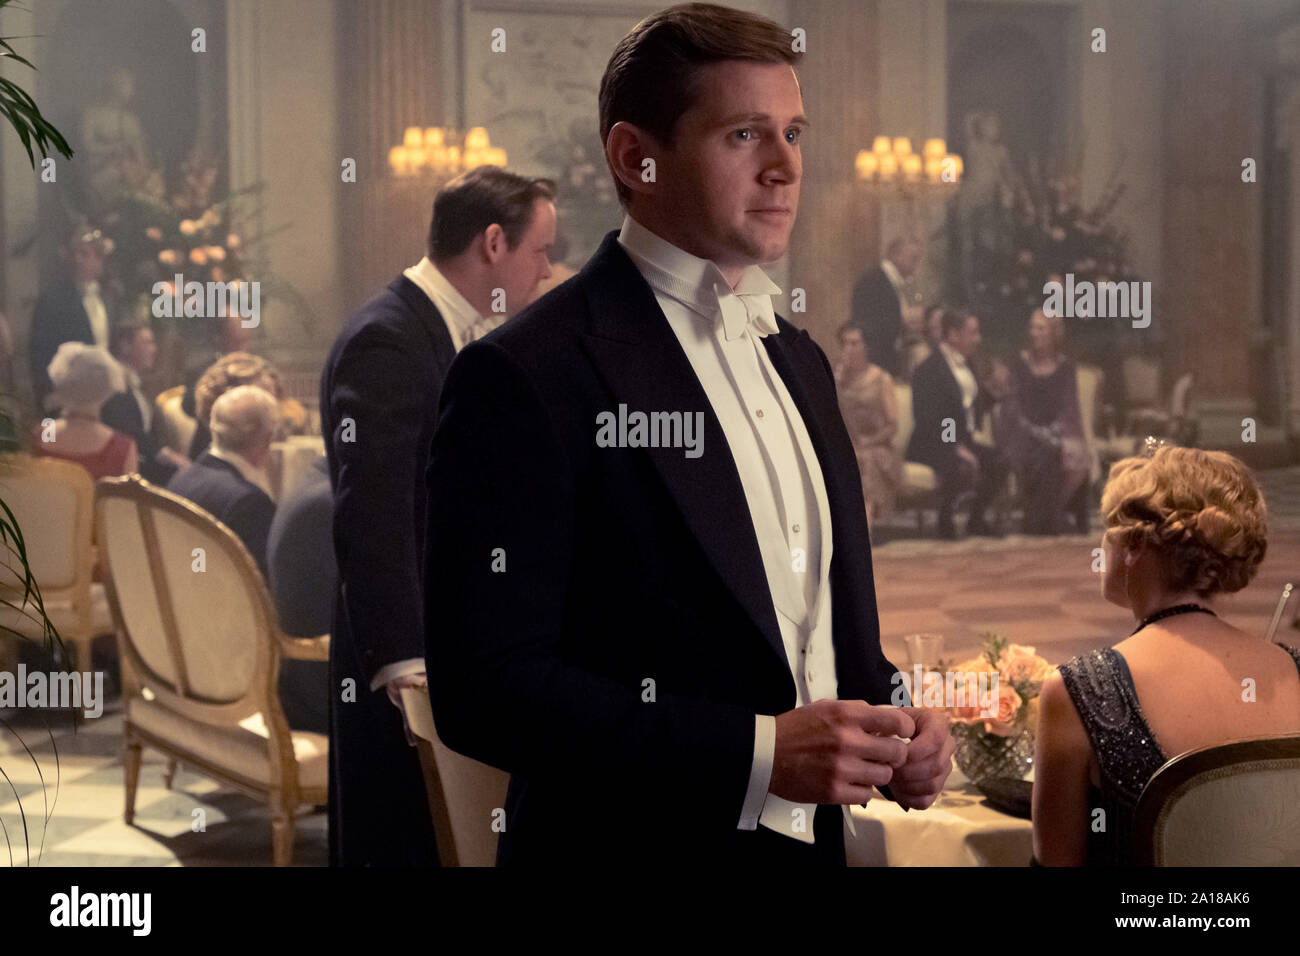 Allen Leech stars as Tom Branson in DOWNTON ABBEY, a Focus Features  release. (2019) Credit: Jaap Buitendijk / Focus Features /The Hollywood  Archive Stock Photo - Alamy